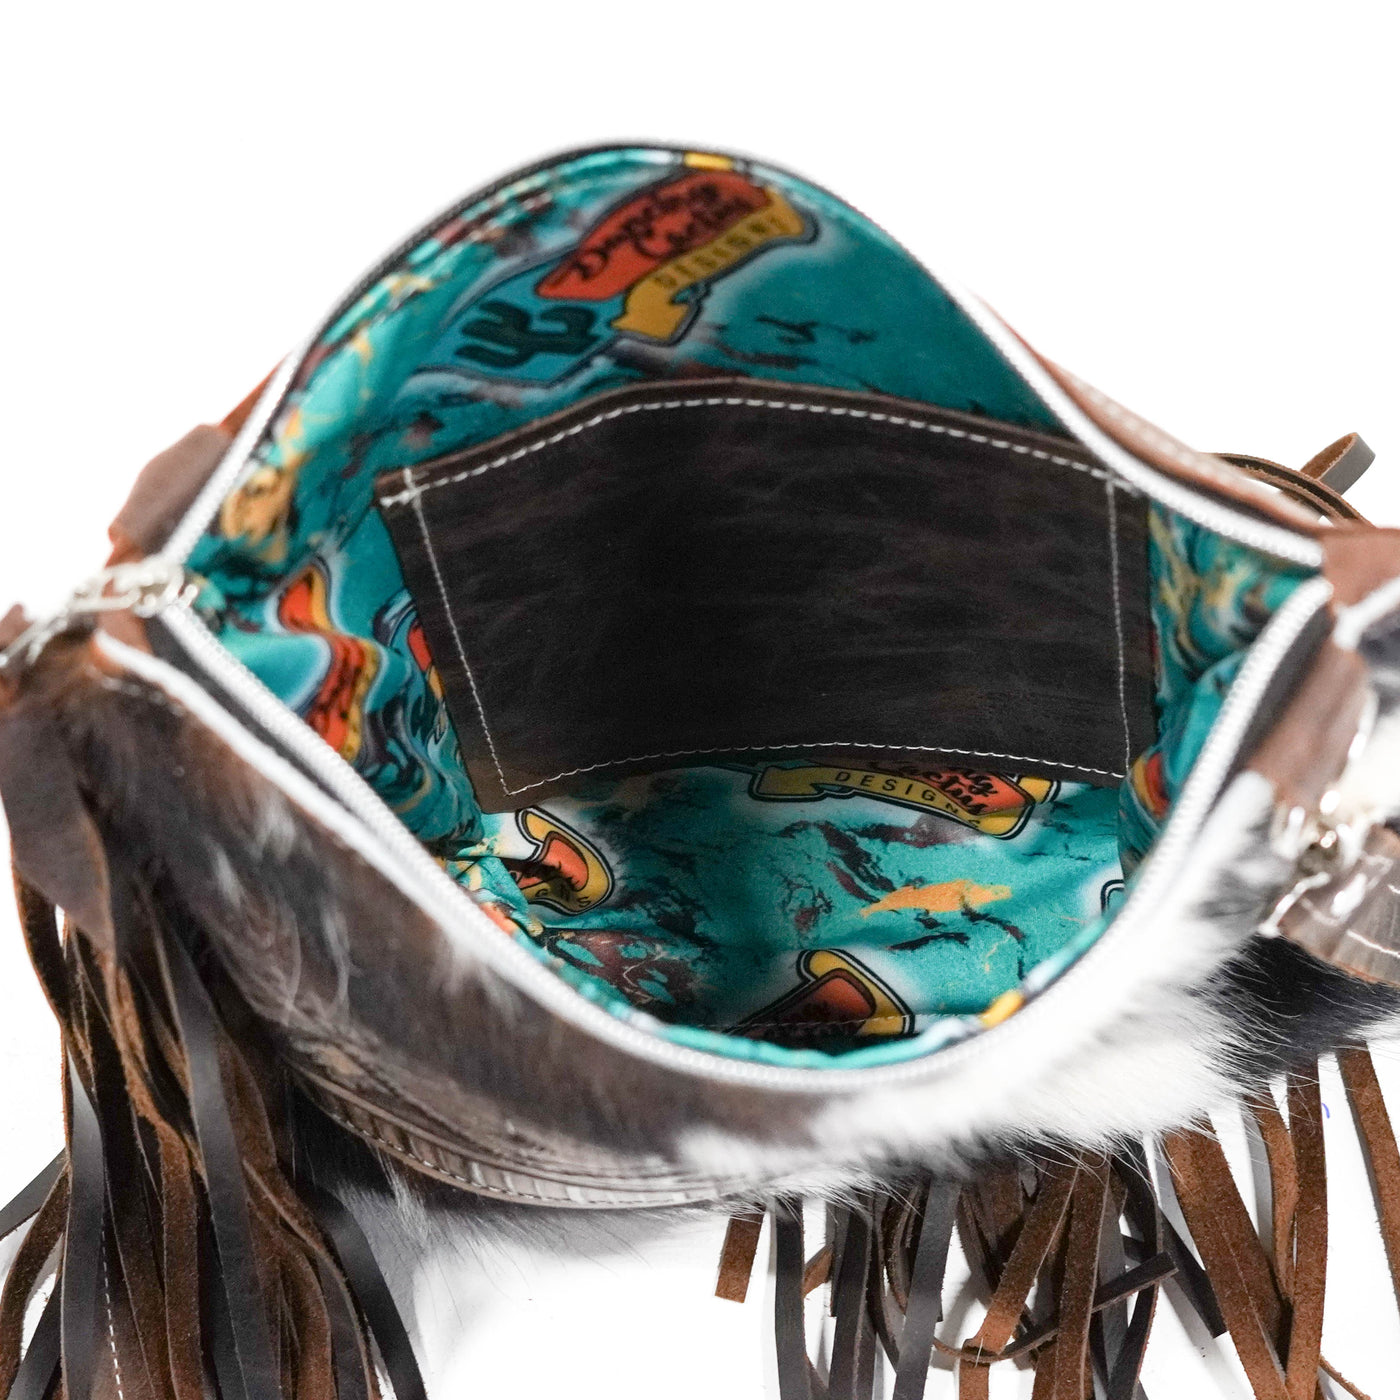 Shania - Tricolor w/ Cowboy Navajo-Shania-Western-Cowhide-Bags-Handmade-Products-Gifts-Dancing Cactus Designs